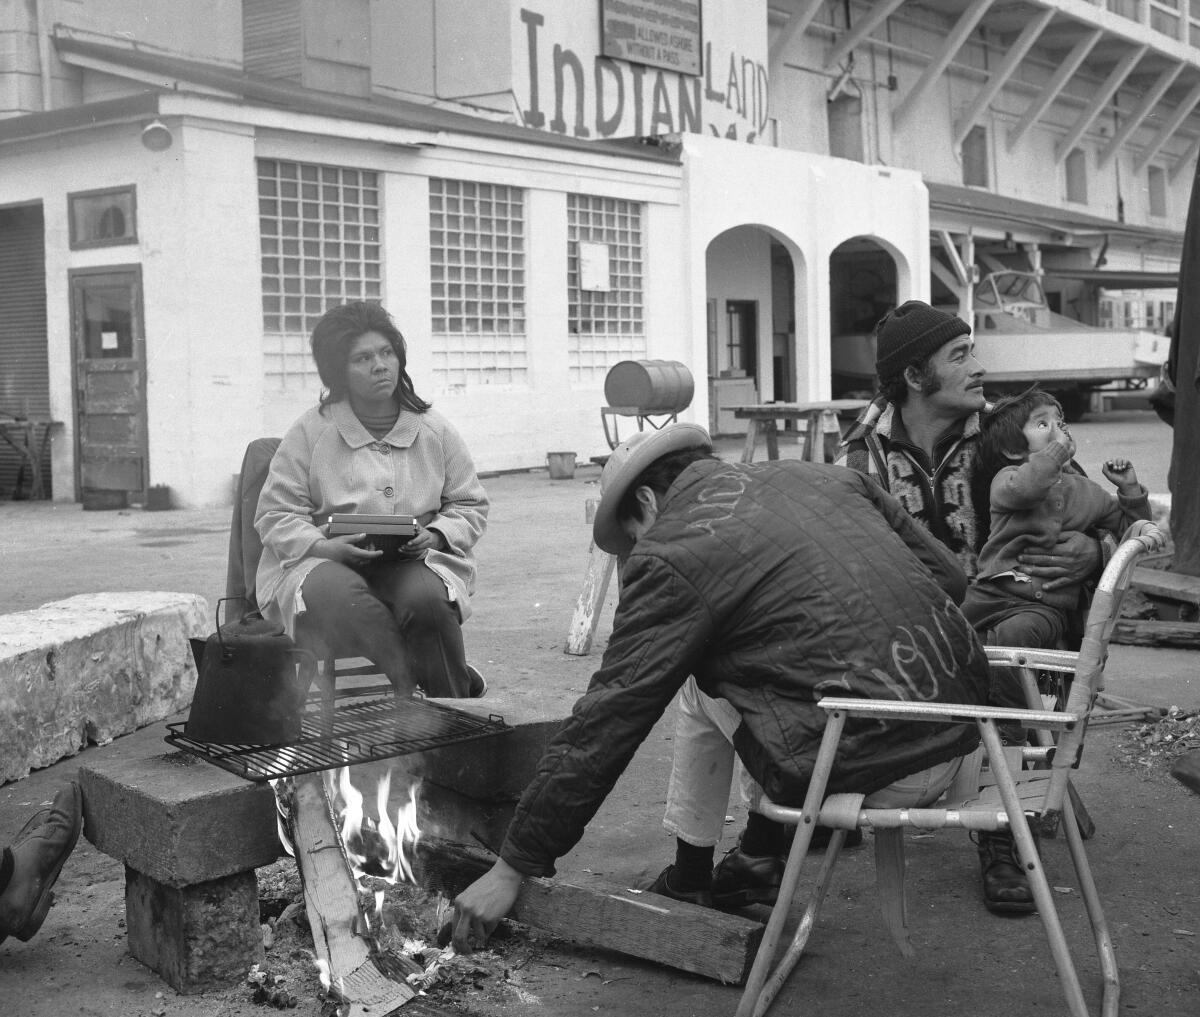 A woman, two men and a child sit in lawn chairs in front of a large white building and next to a small fire with a grate.